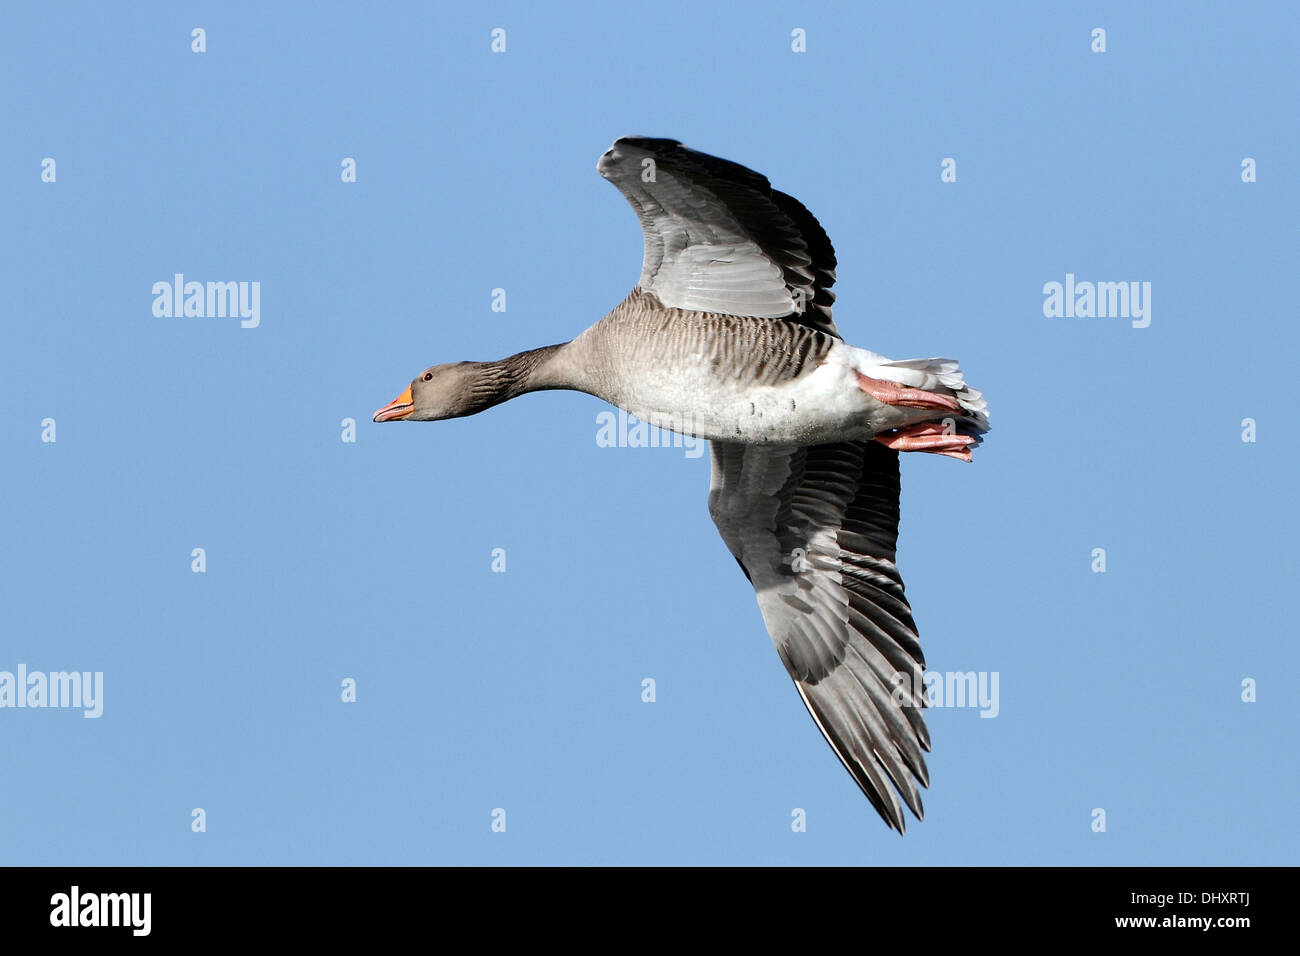 A Greylag Goose (Anser anser) in flight against a clear blue sky. Stock Photo